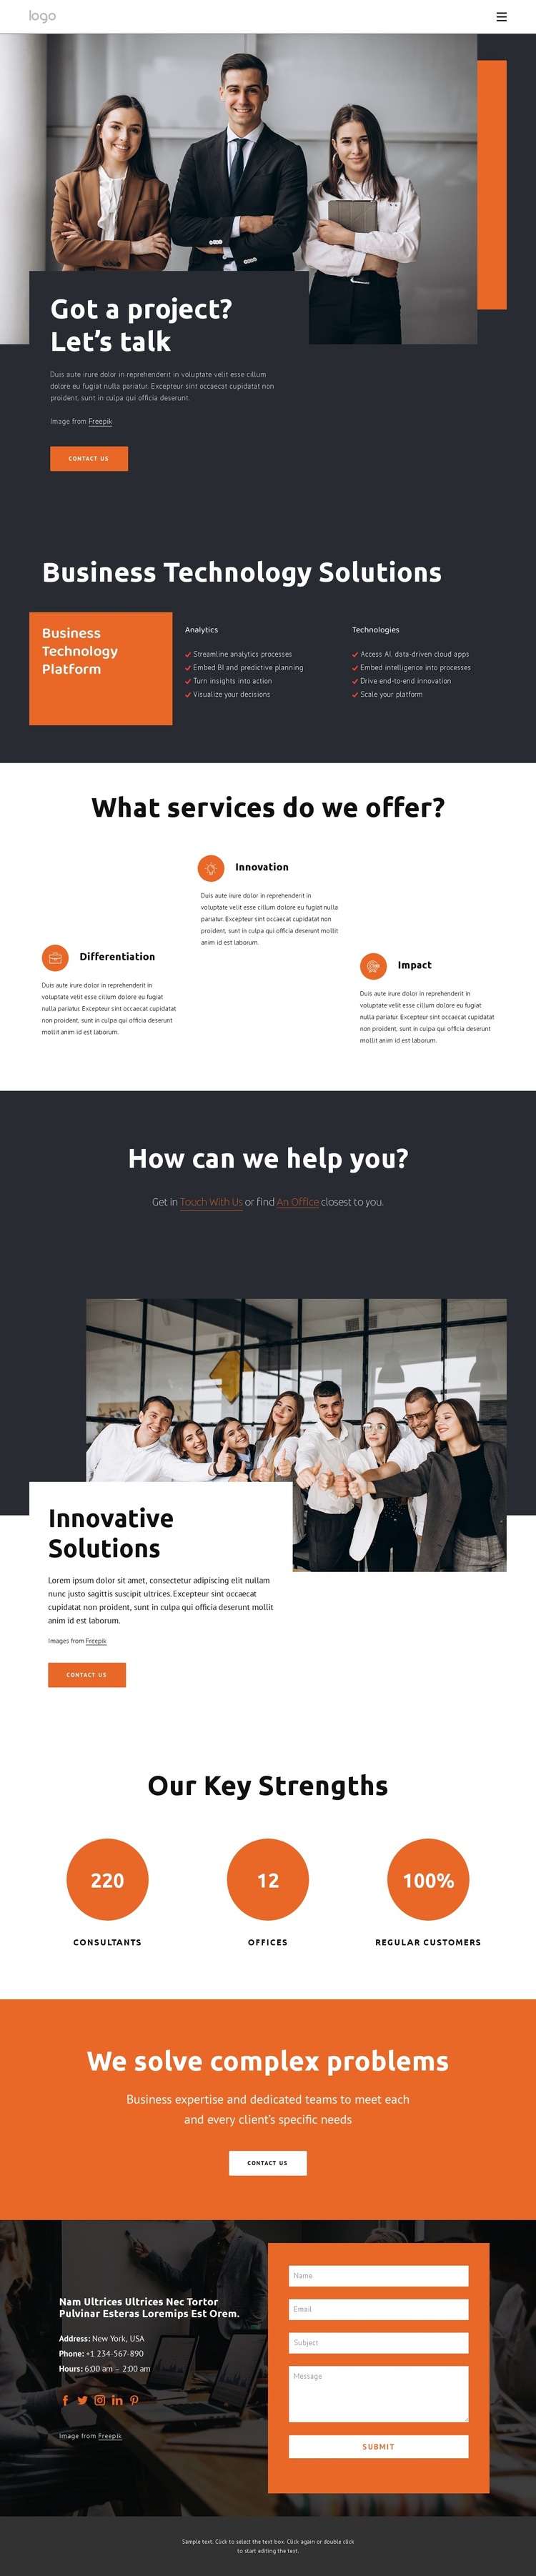 One of the best-known firms HTML5 Template